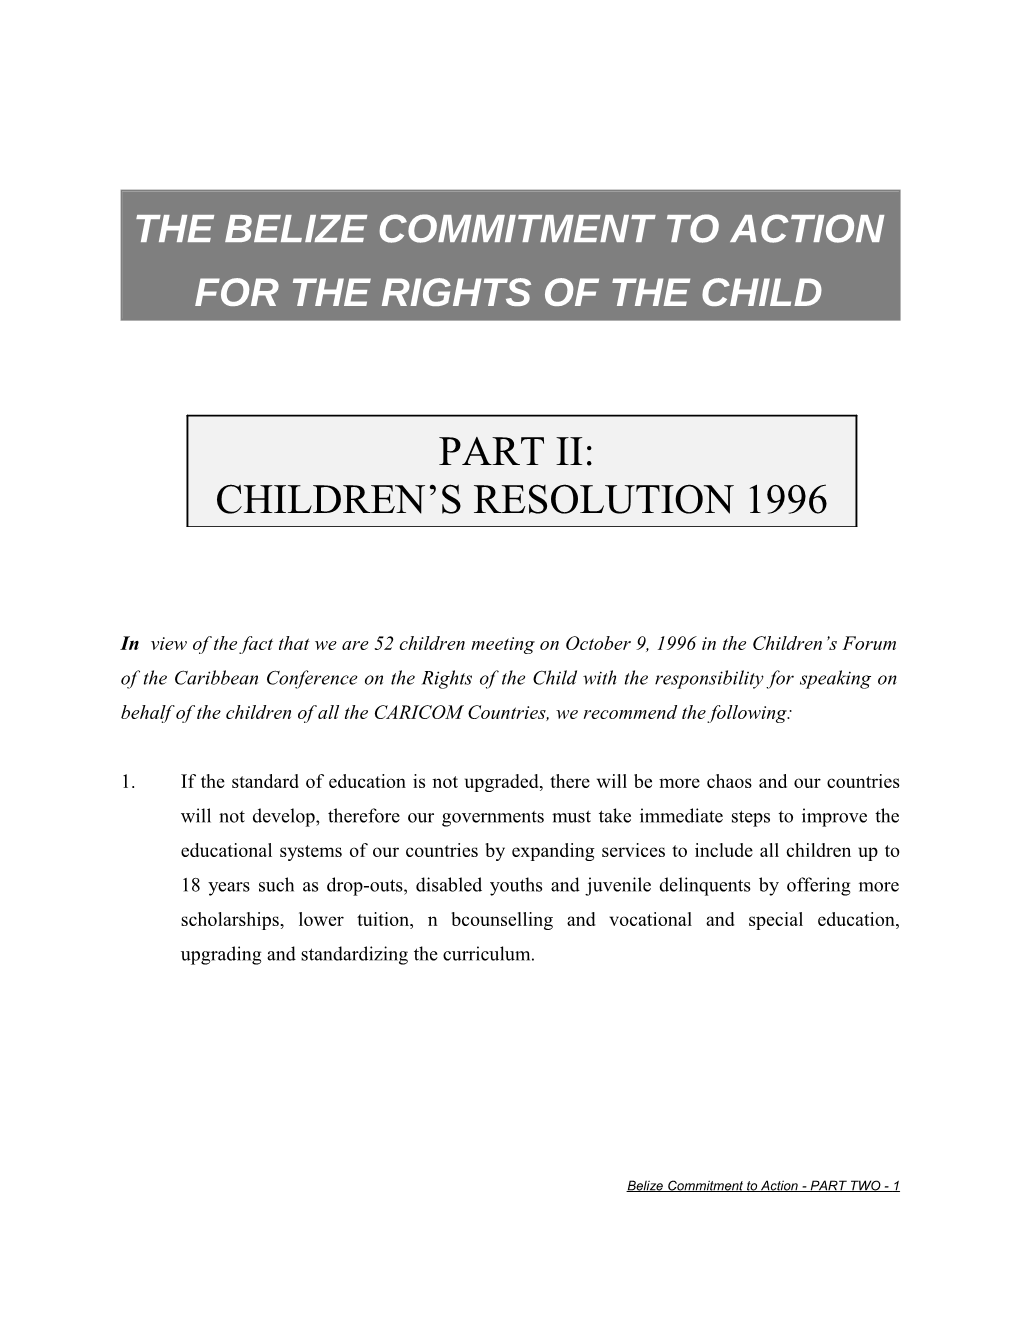 The Belize Commitment to Action